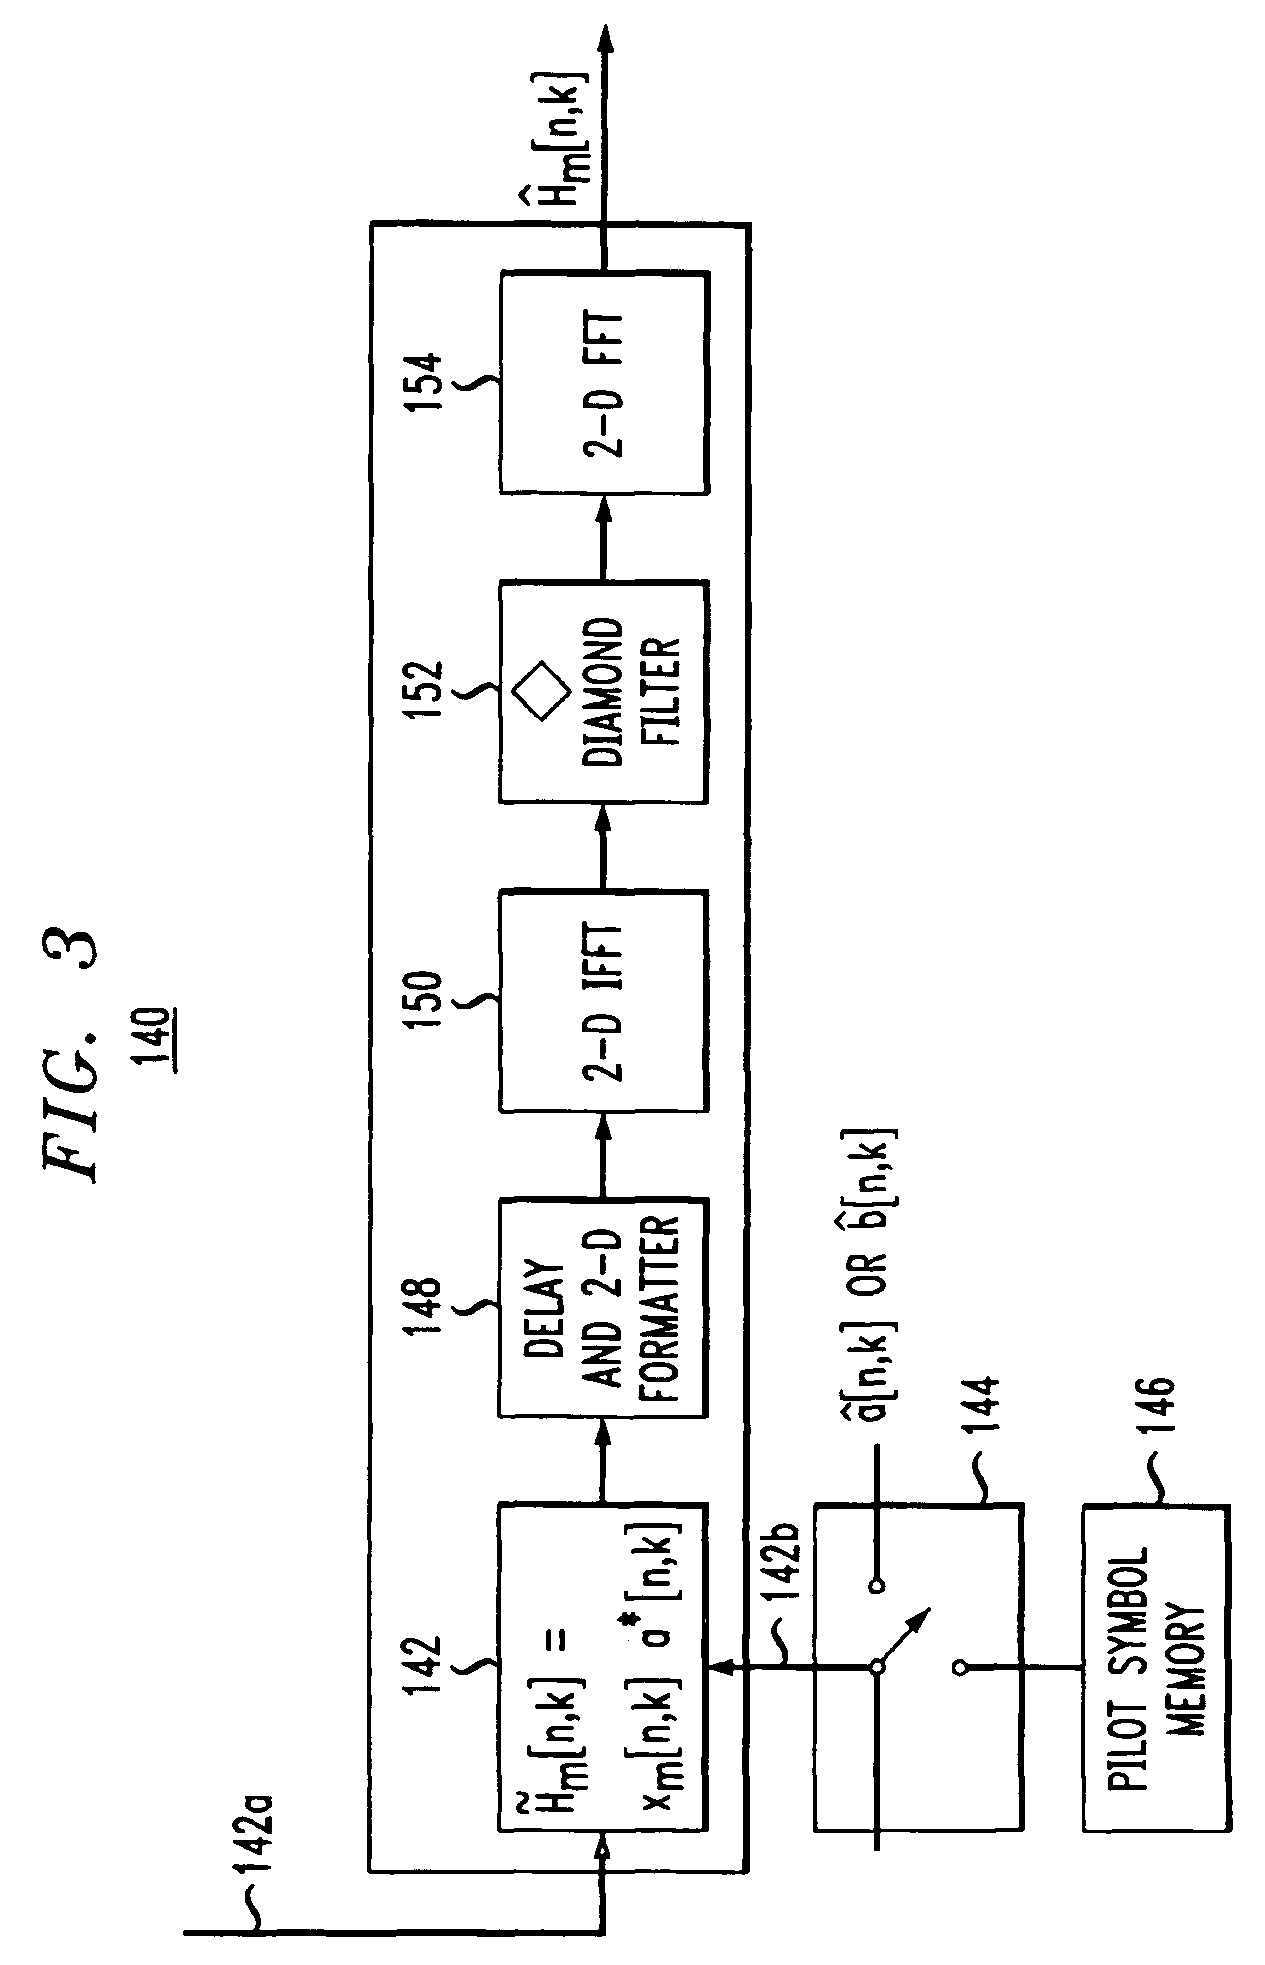 Pilot-aided channel estimation for OFDM in wireless systems